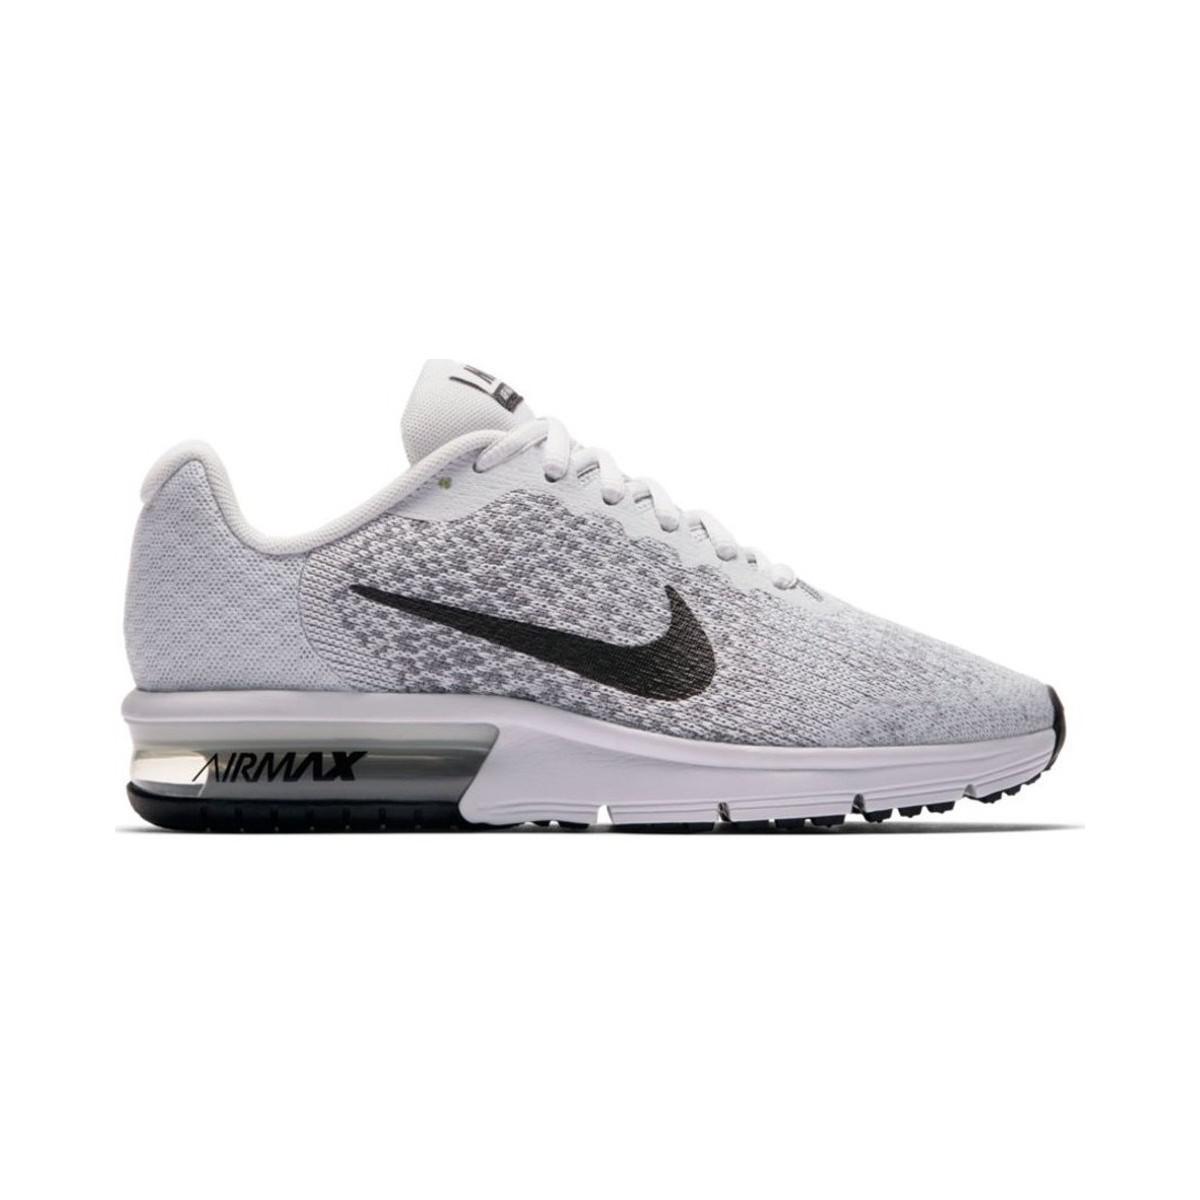 nike air max sequent 2 performance running shoe - women's